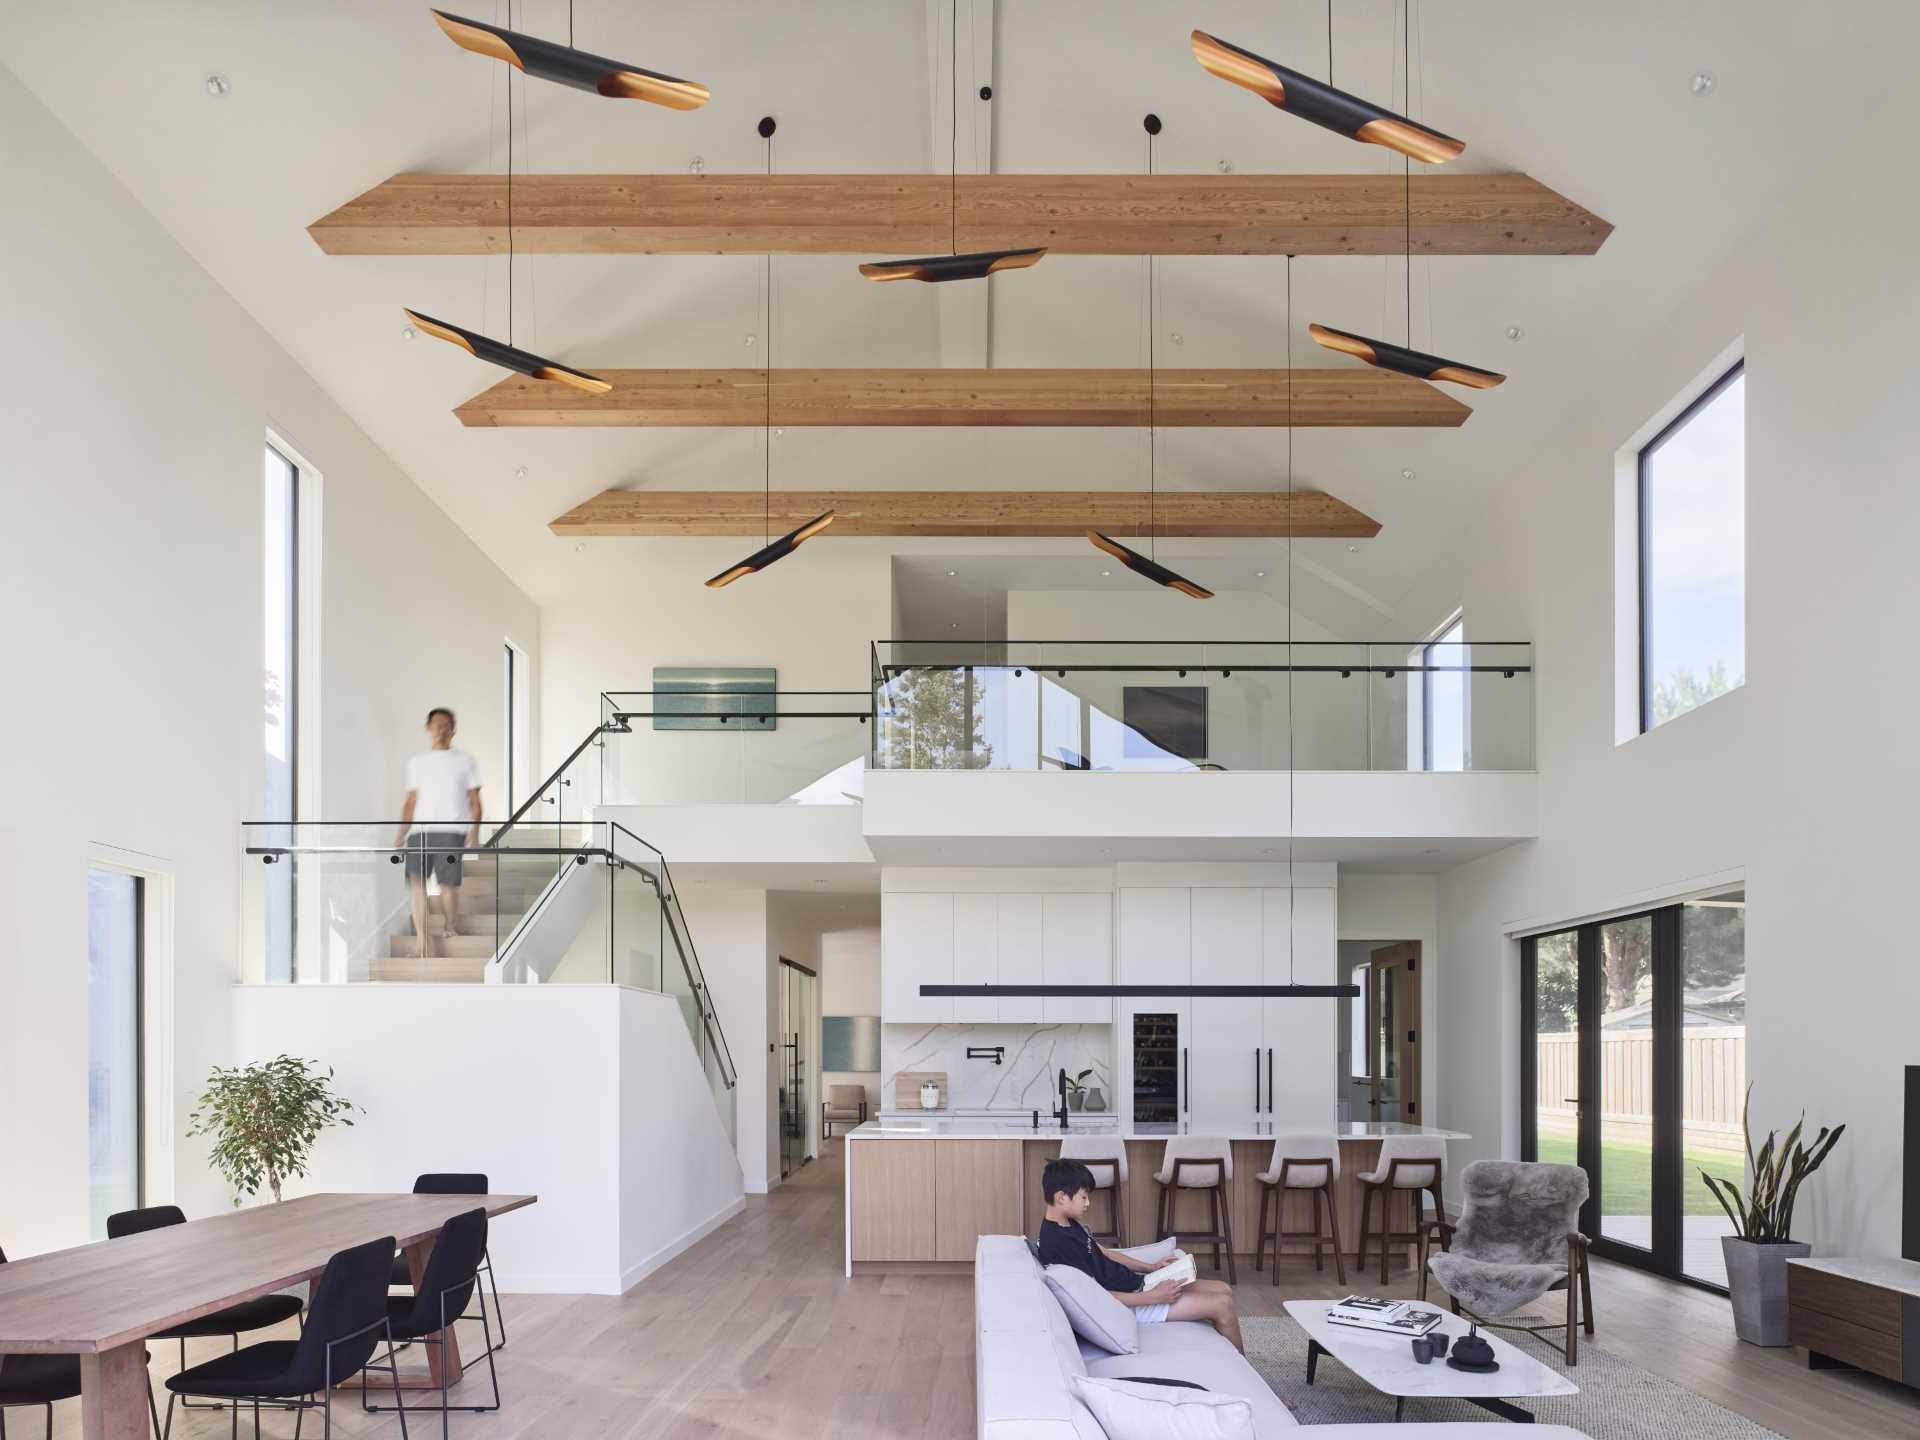 The main living space, which includes the living, dining, and kitchen area, features a vaulted ceiling that reaches a peak height of 25 feet (7m).